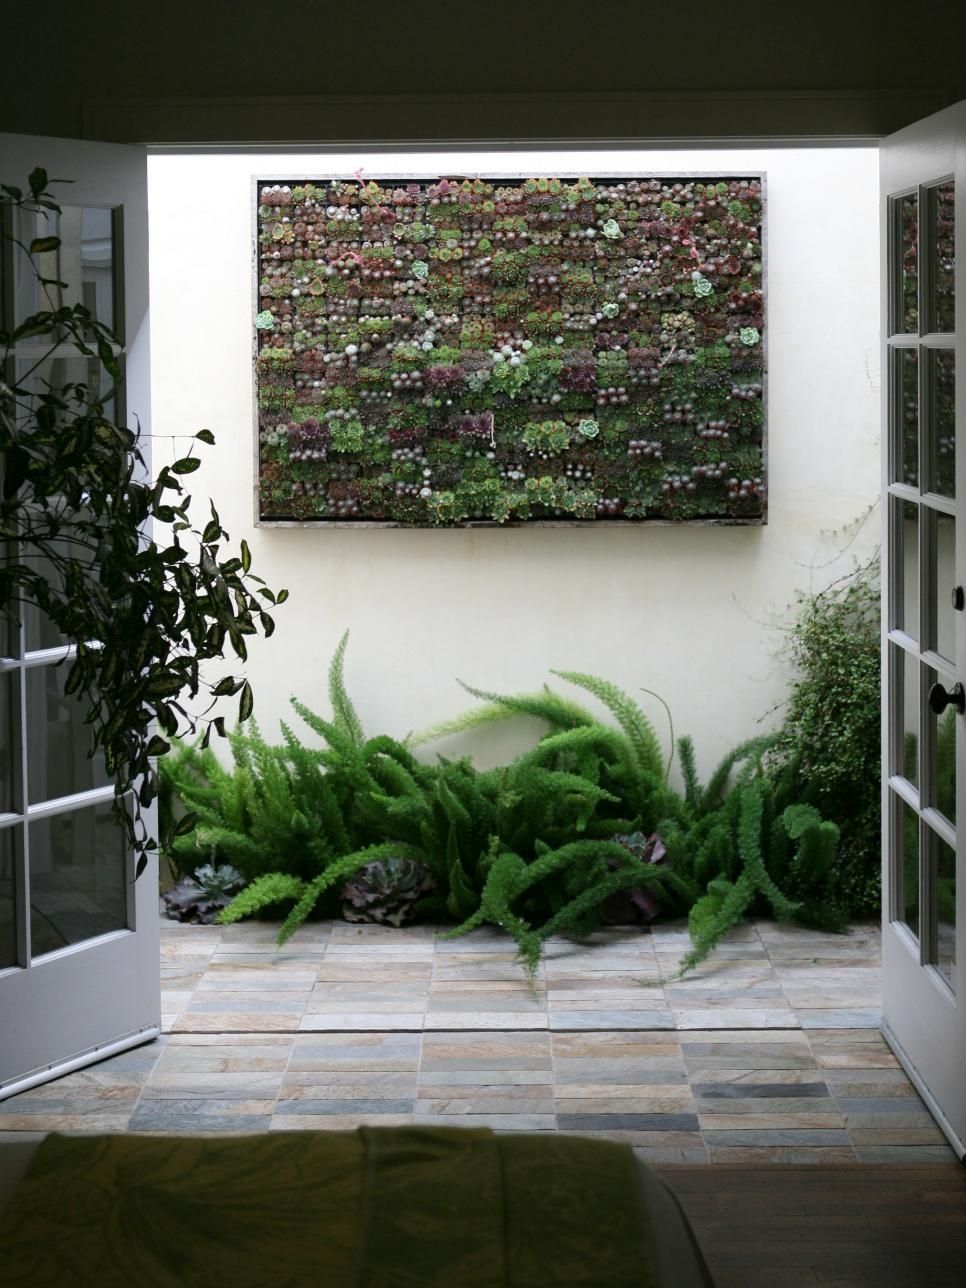 Amazing Outdoor Walls And Fences | Hgtv In Italian Garden Wall Art (View 6 of 20)